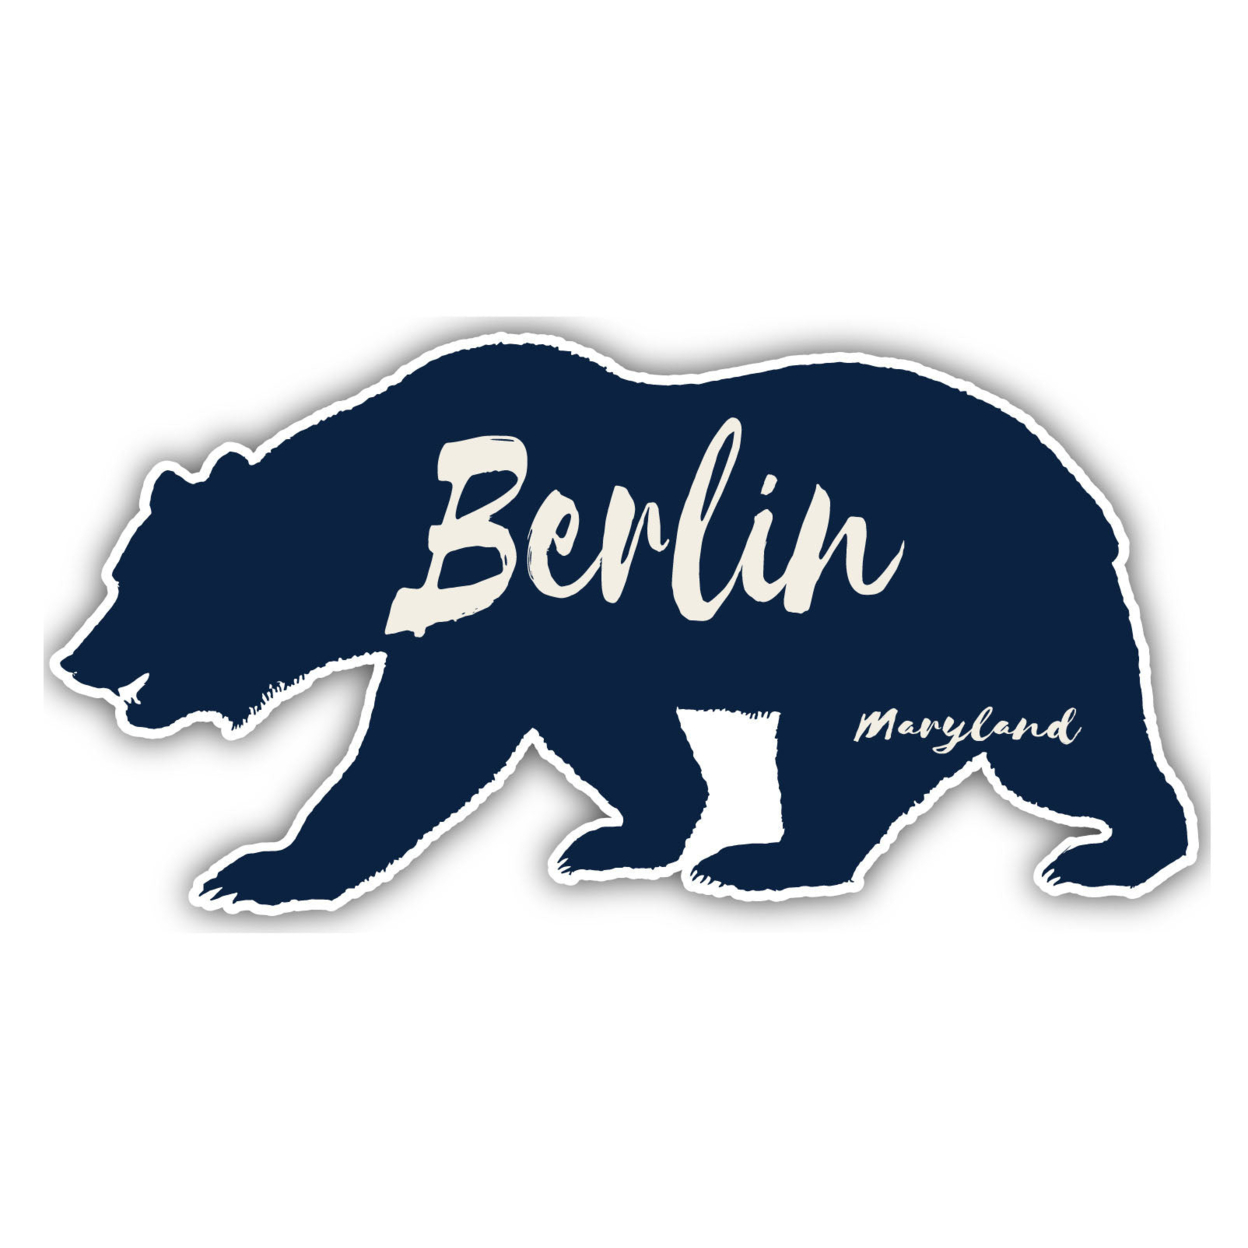 Berlin Maryland Souvenir Decorative Stickers (Choose Theme And Size) - 4-Pack, 12-Inch, Bear